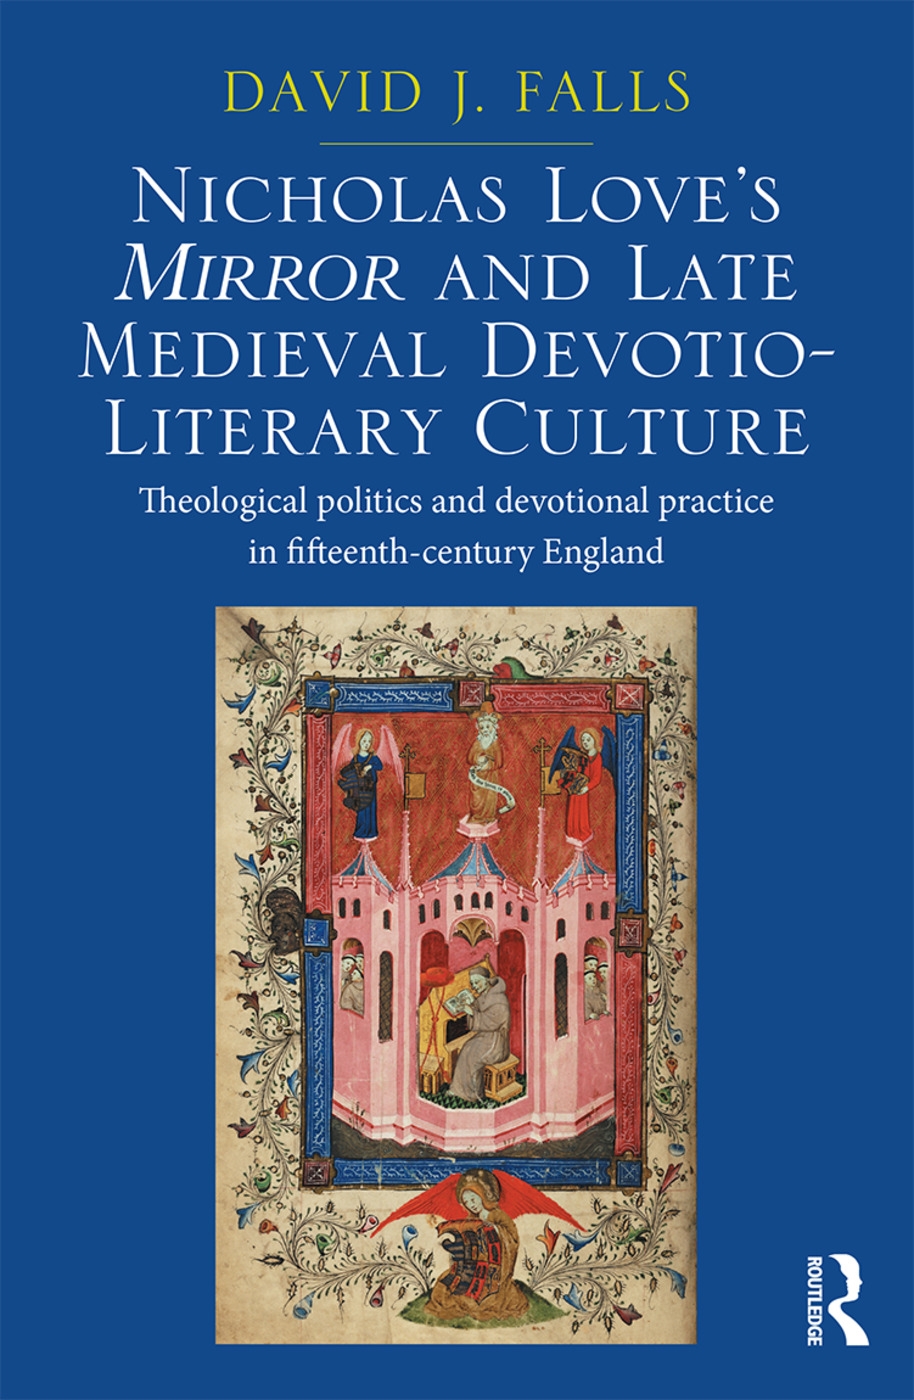 Nicholas Love’s Mirror and Late Medieval Devotio-Literary Culture: Theological Politics and Devotional Practice in Fifteenth-Century England